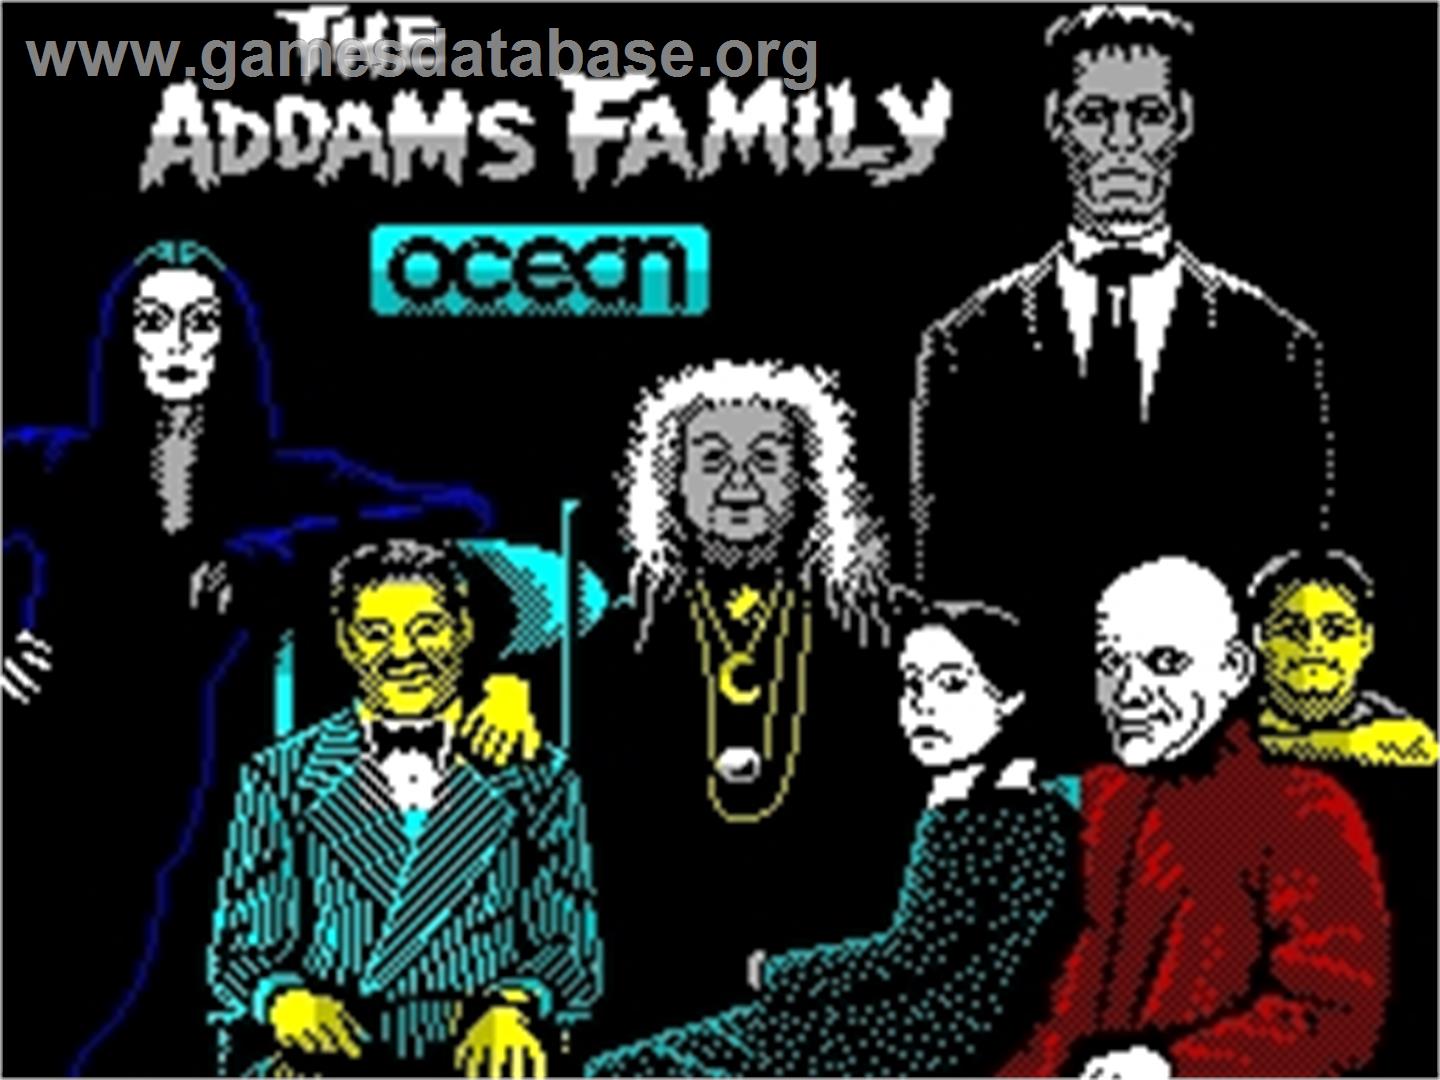 The Addams Family - Sinclair ZX Spectrum - Artwork - Title Screen